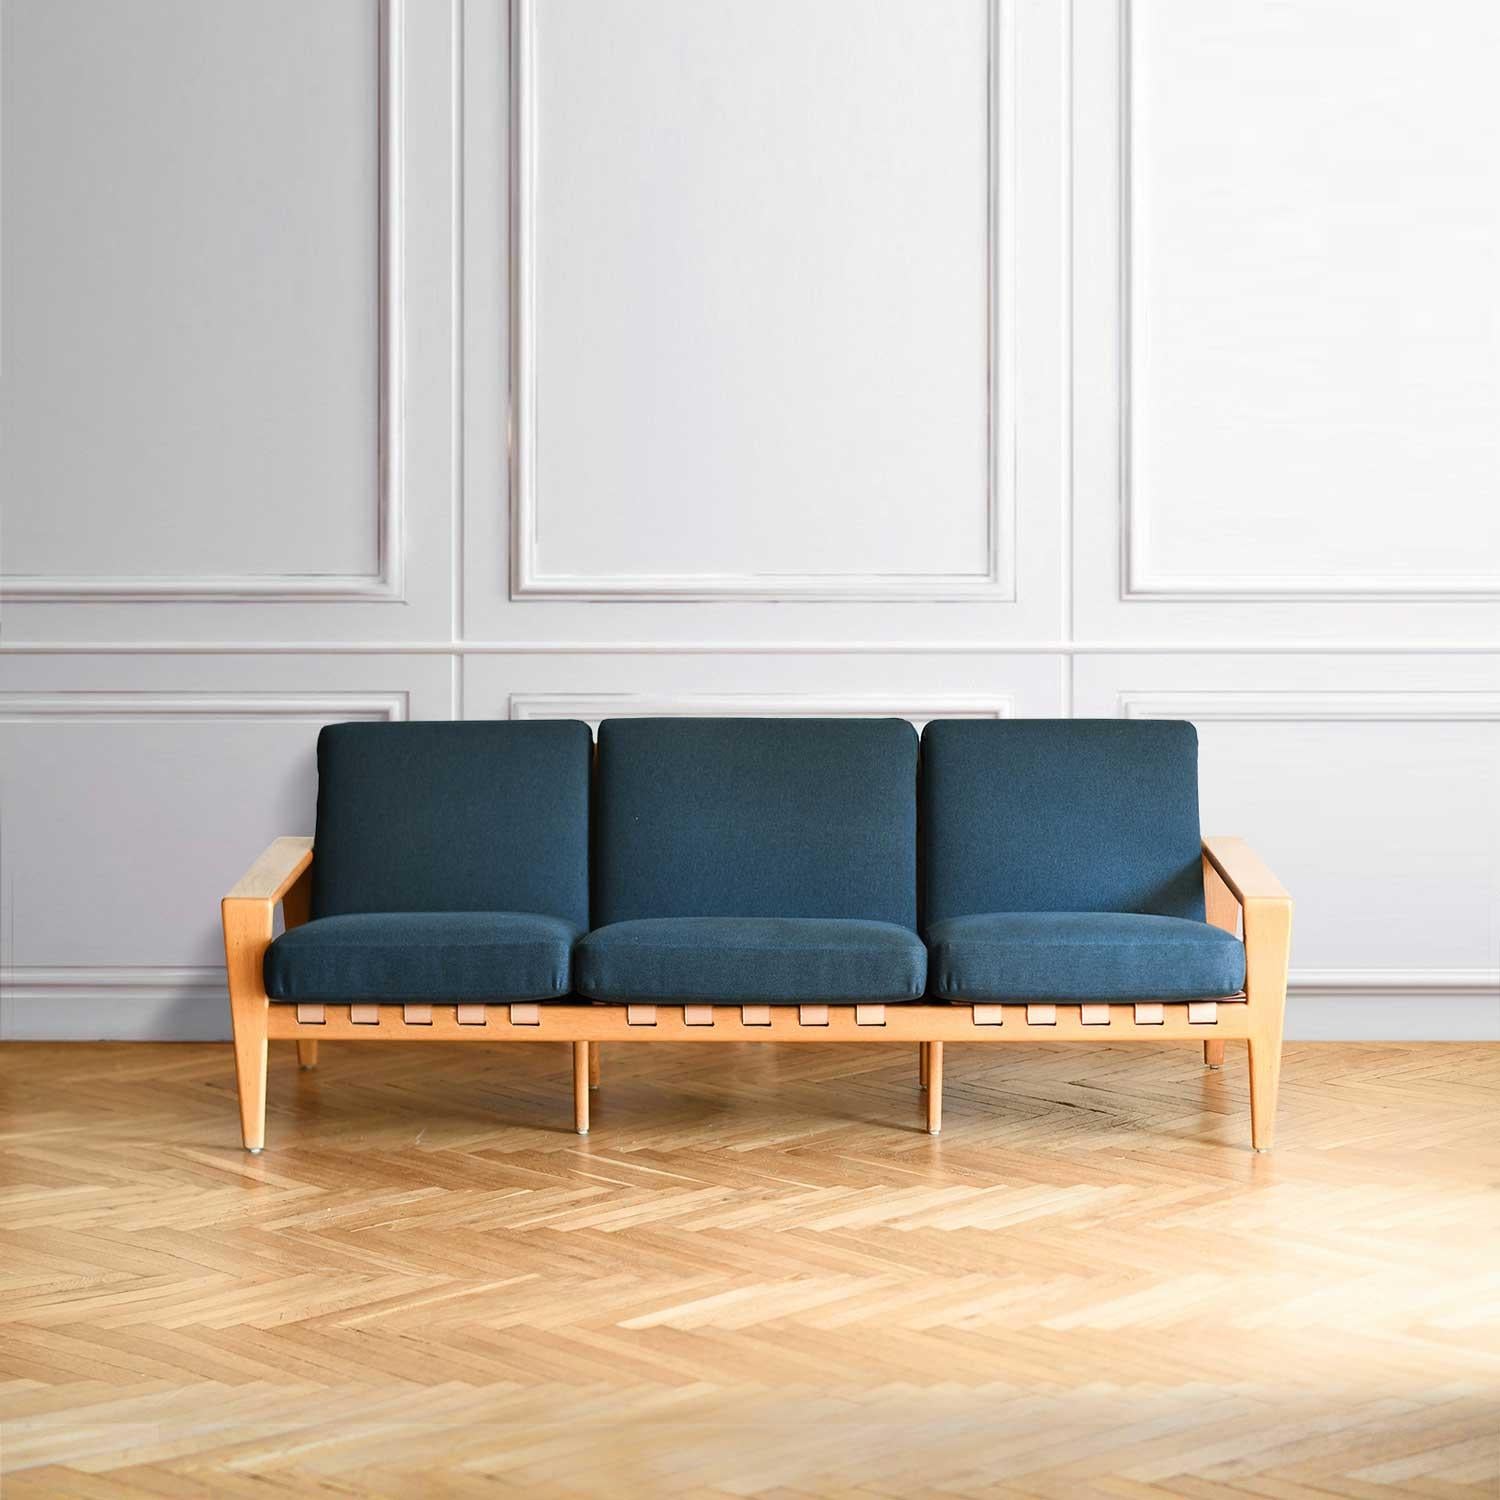 Svante Skogh 1957 “Bodo” Sofa made in Swedish oak
PRODUCT DETAILS
Dimensions: 193w x 80h x 80dcm
Materials: oak wood, fabric
Production: Saffle Mobler 1957
The coordinated armchairs can be purchased separately.